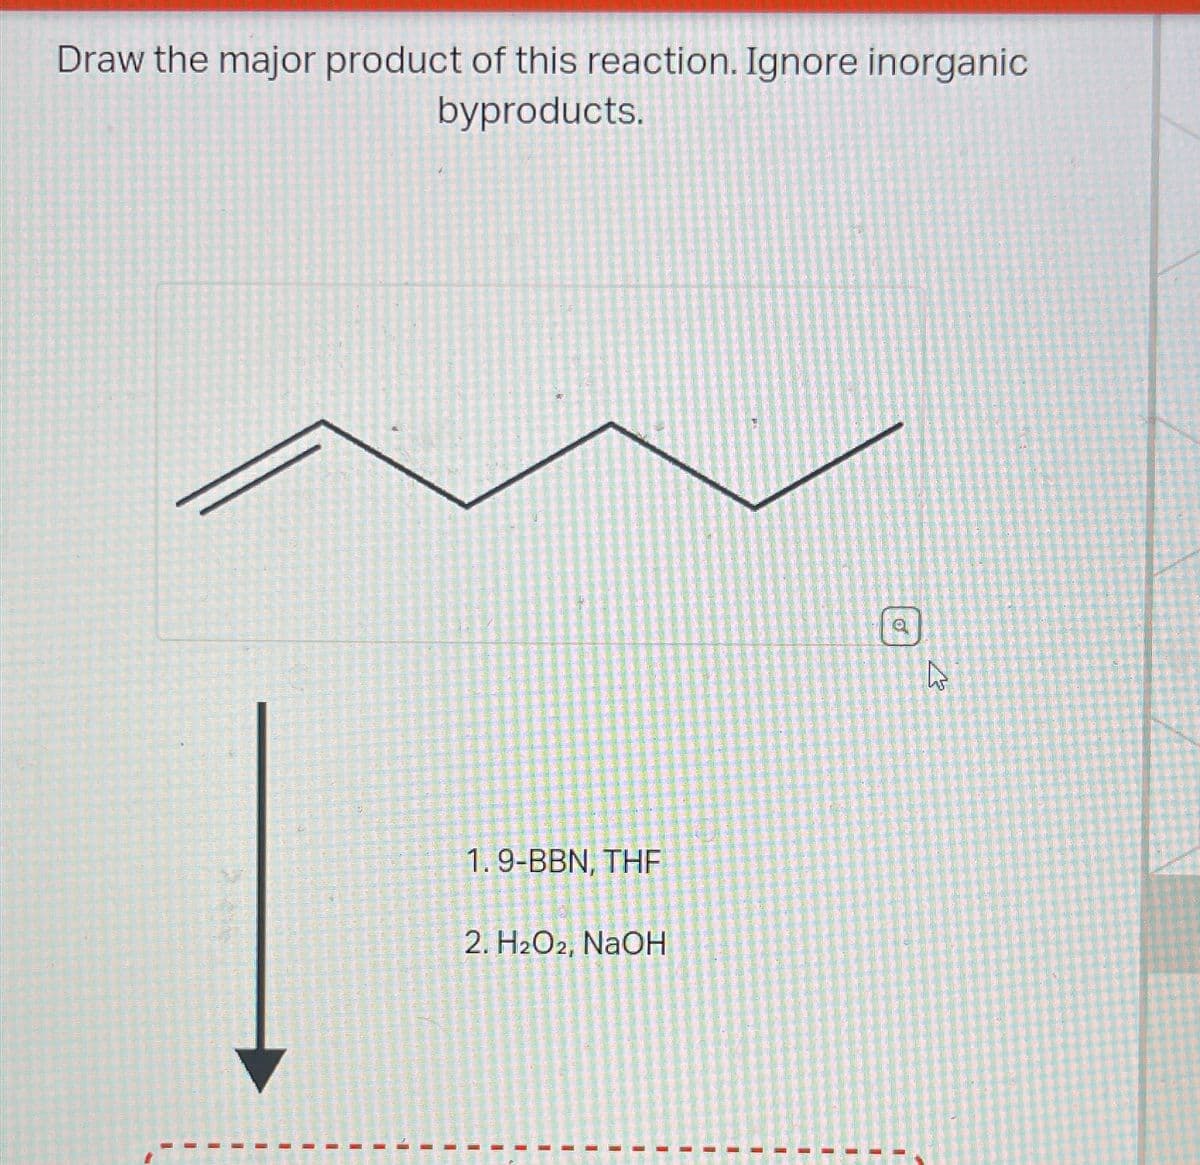 Draw the major product of this reaction. Ignore inorganic
byproducts.
1.9-BBN, THF
2. H2O2, NaOH
6
27